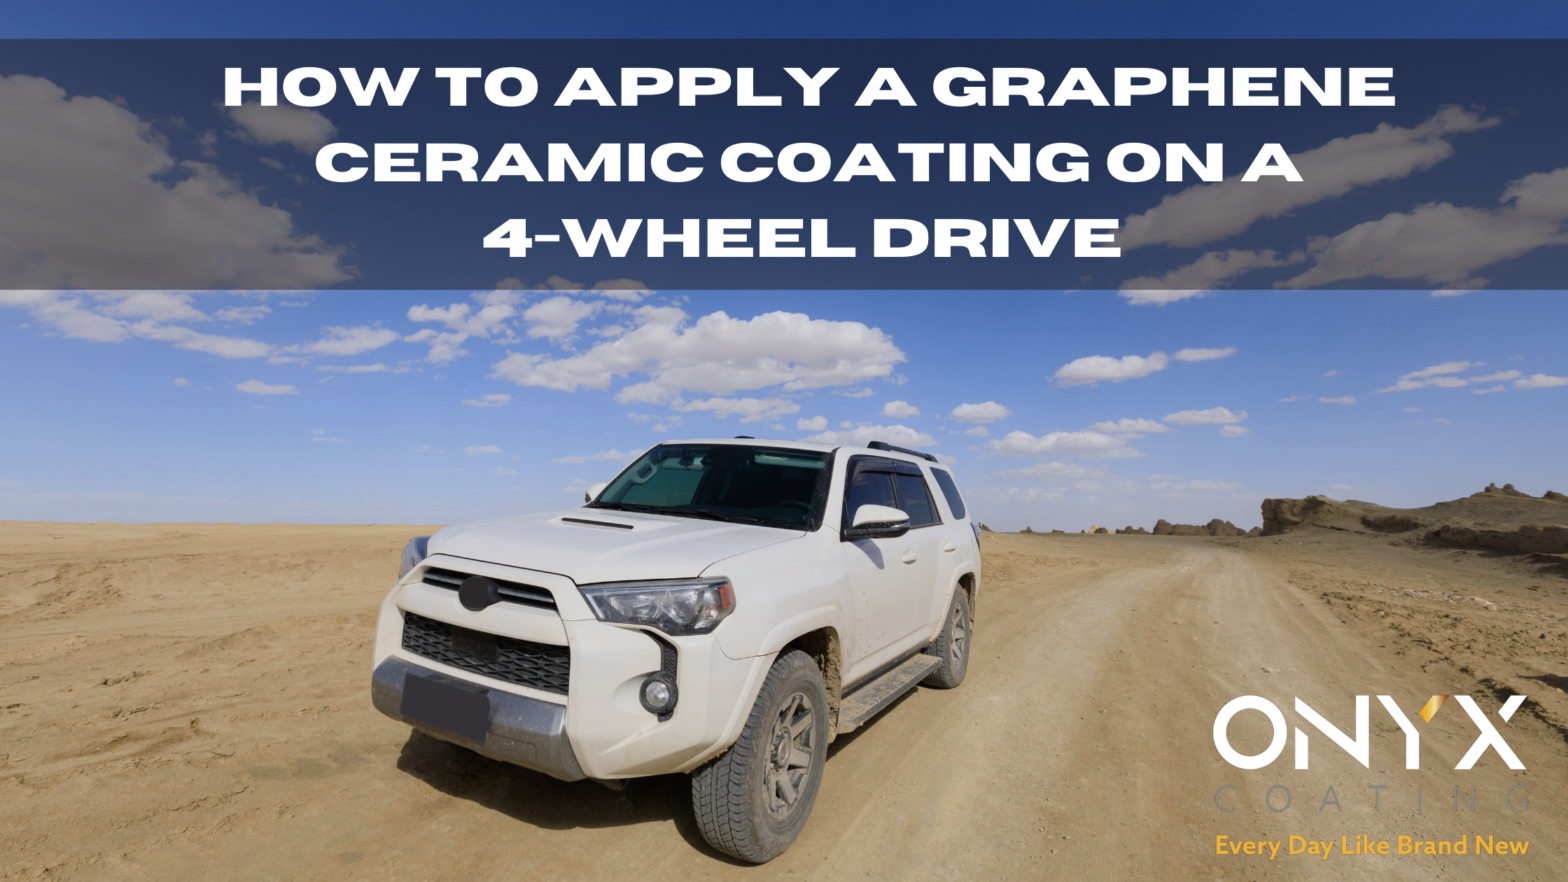 How to prepare & apply a Graphene ceramic coating to a 4x4 wheel drive